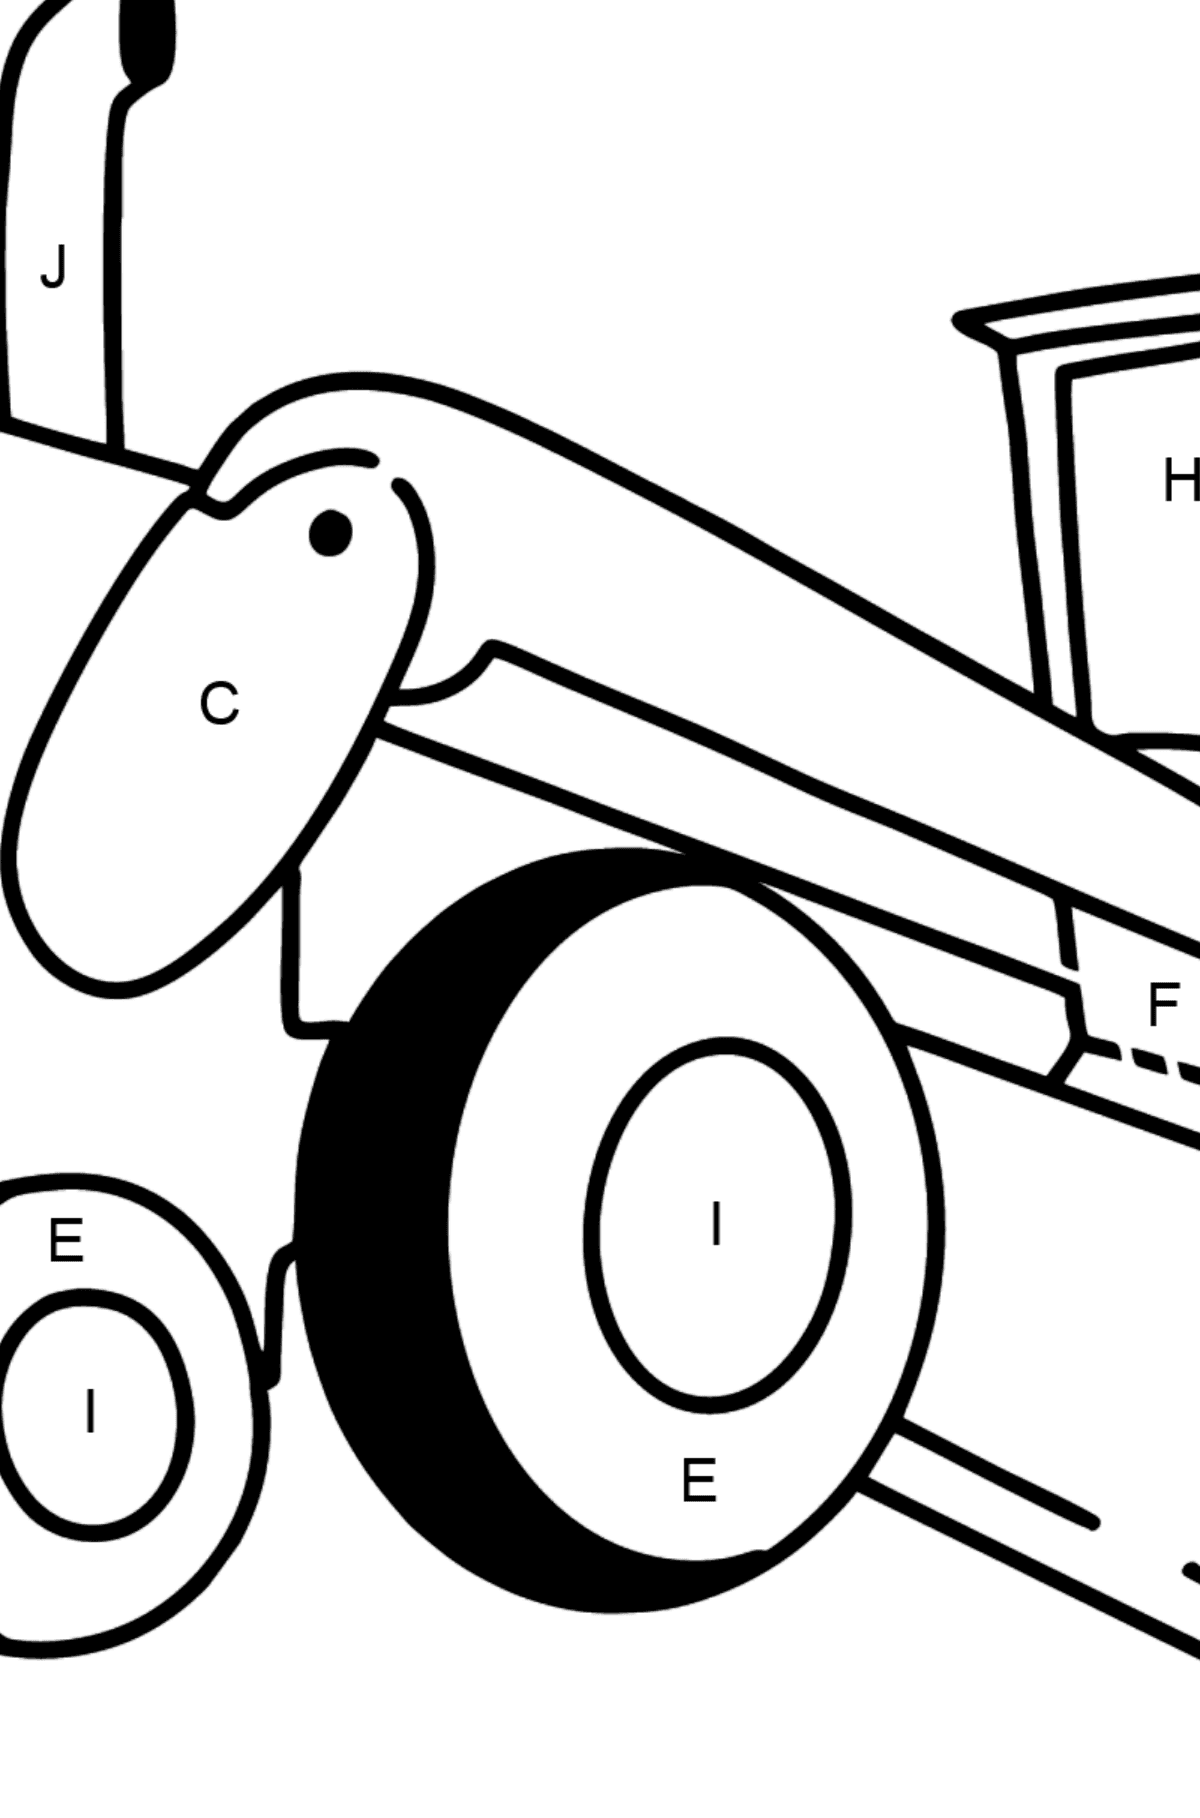 Tractor Grader coloring page - Coloring by Letters for Kids